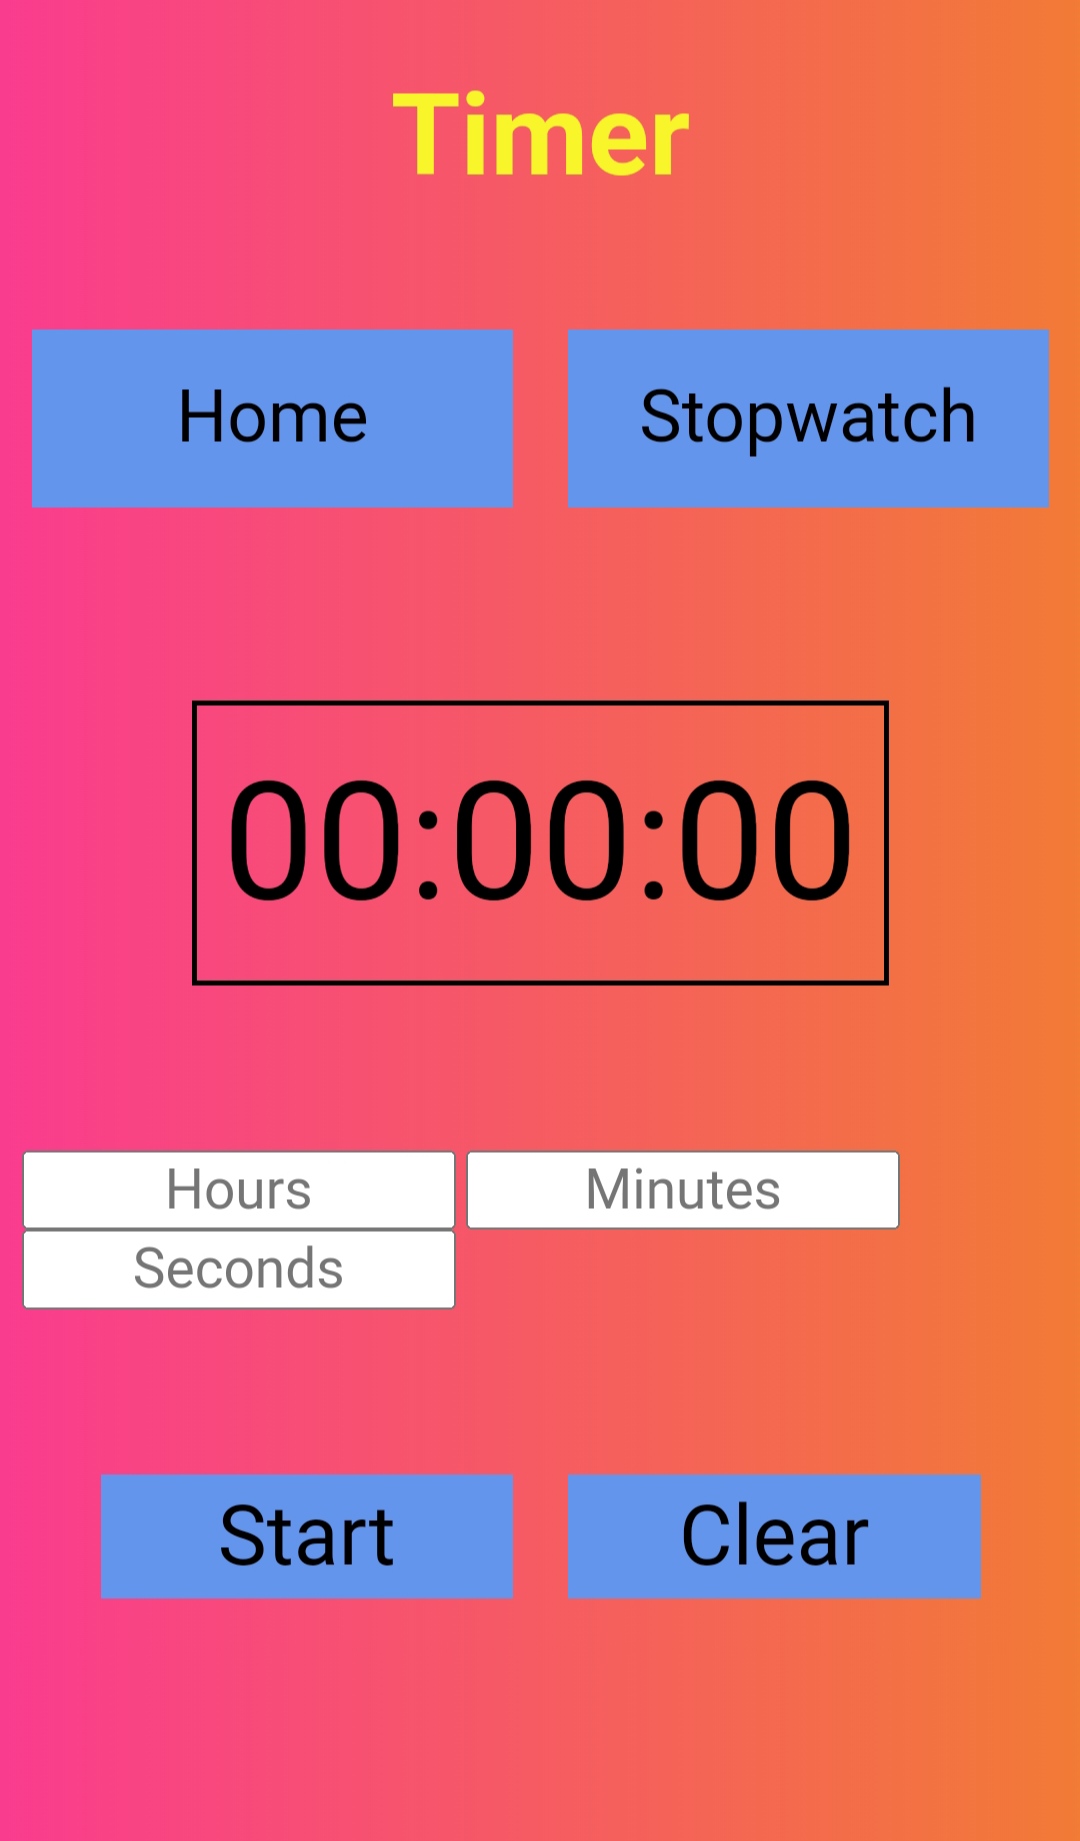 Timer and stopwatch Image